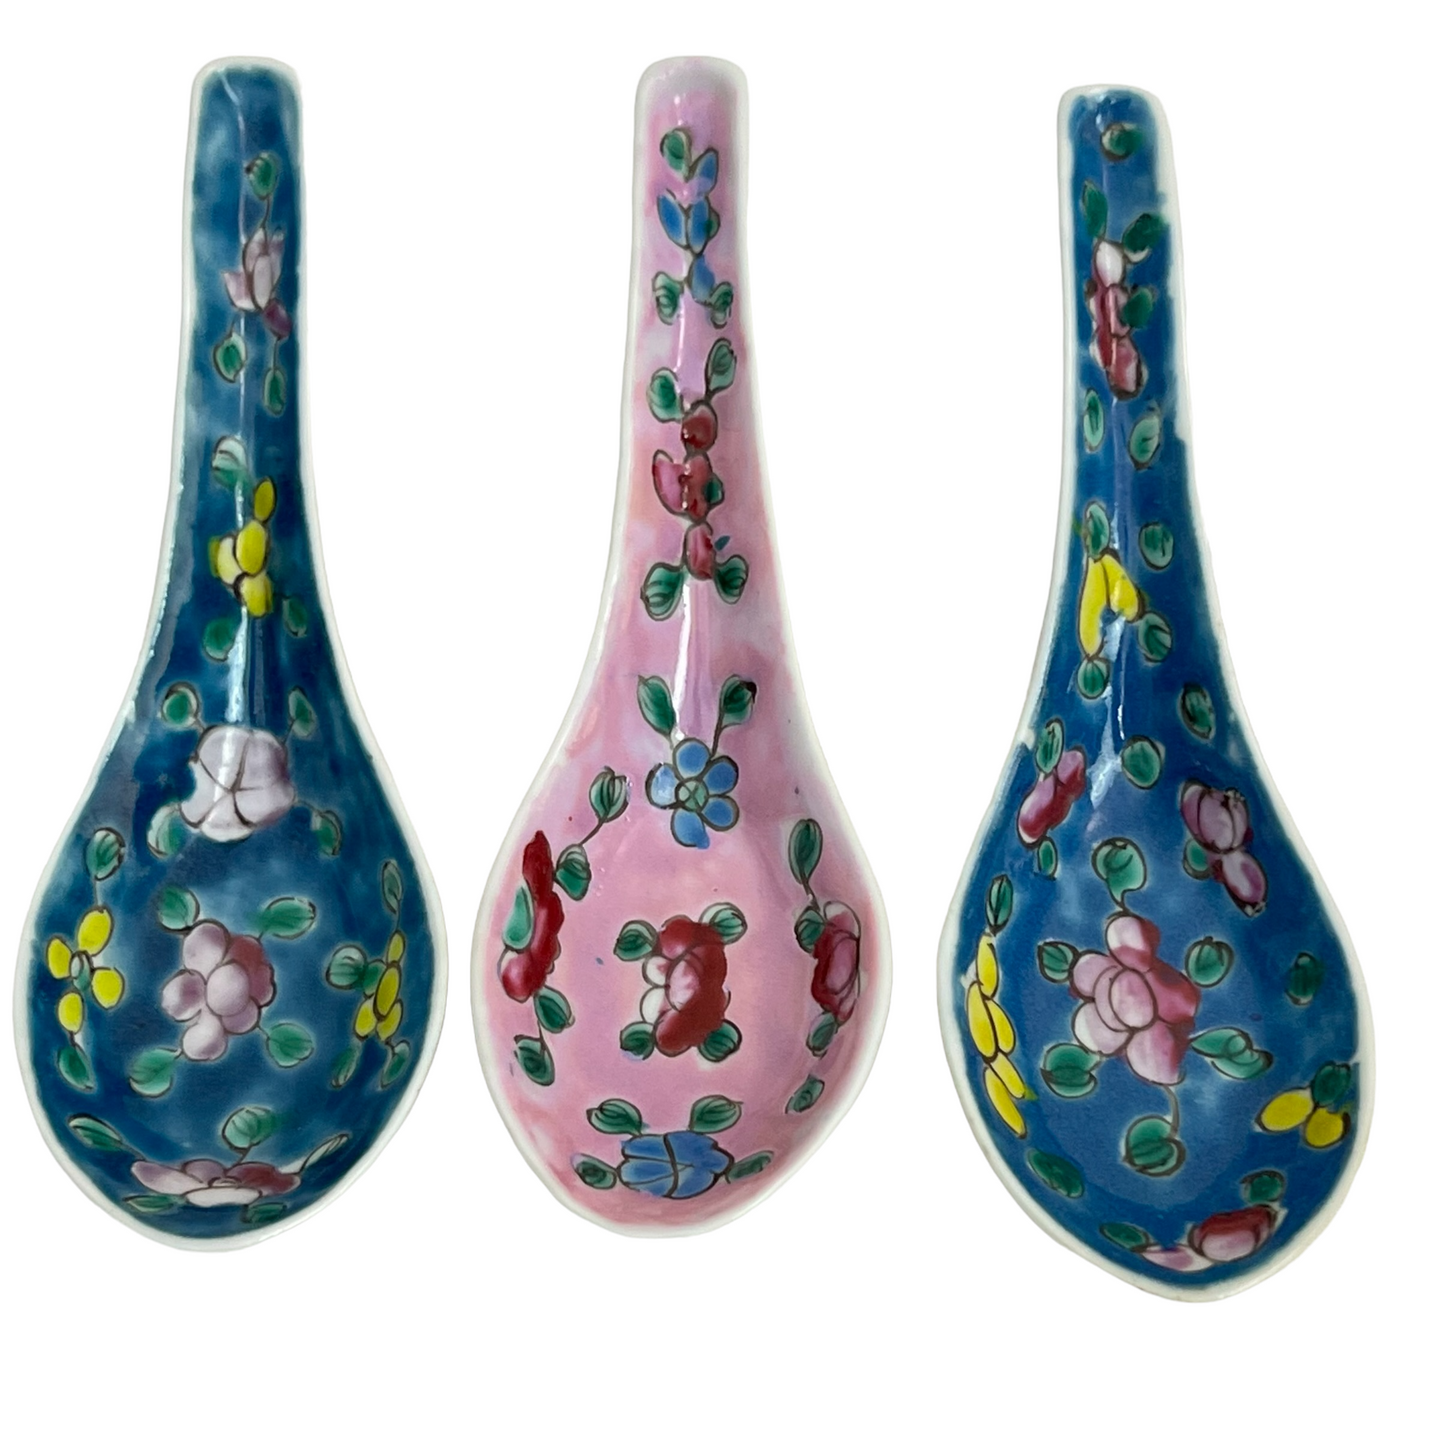 Vintage Chinese Porcelain Soup Spoons Hand Painted Enamel Flowers Set of 6